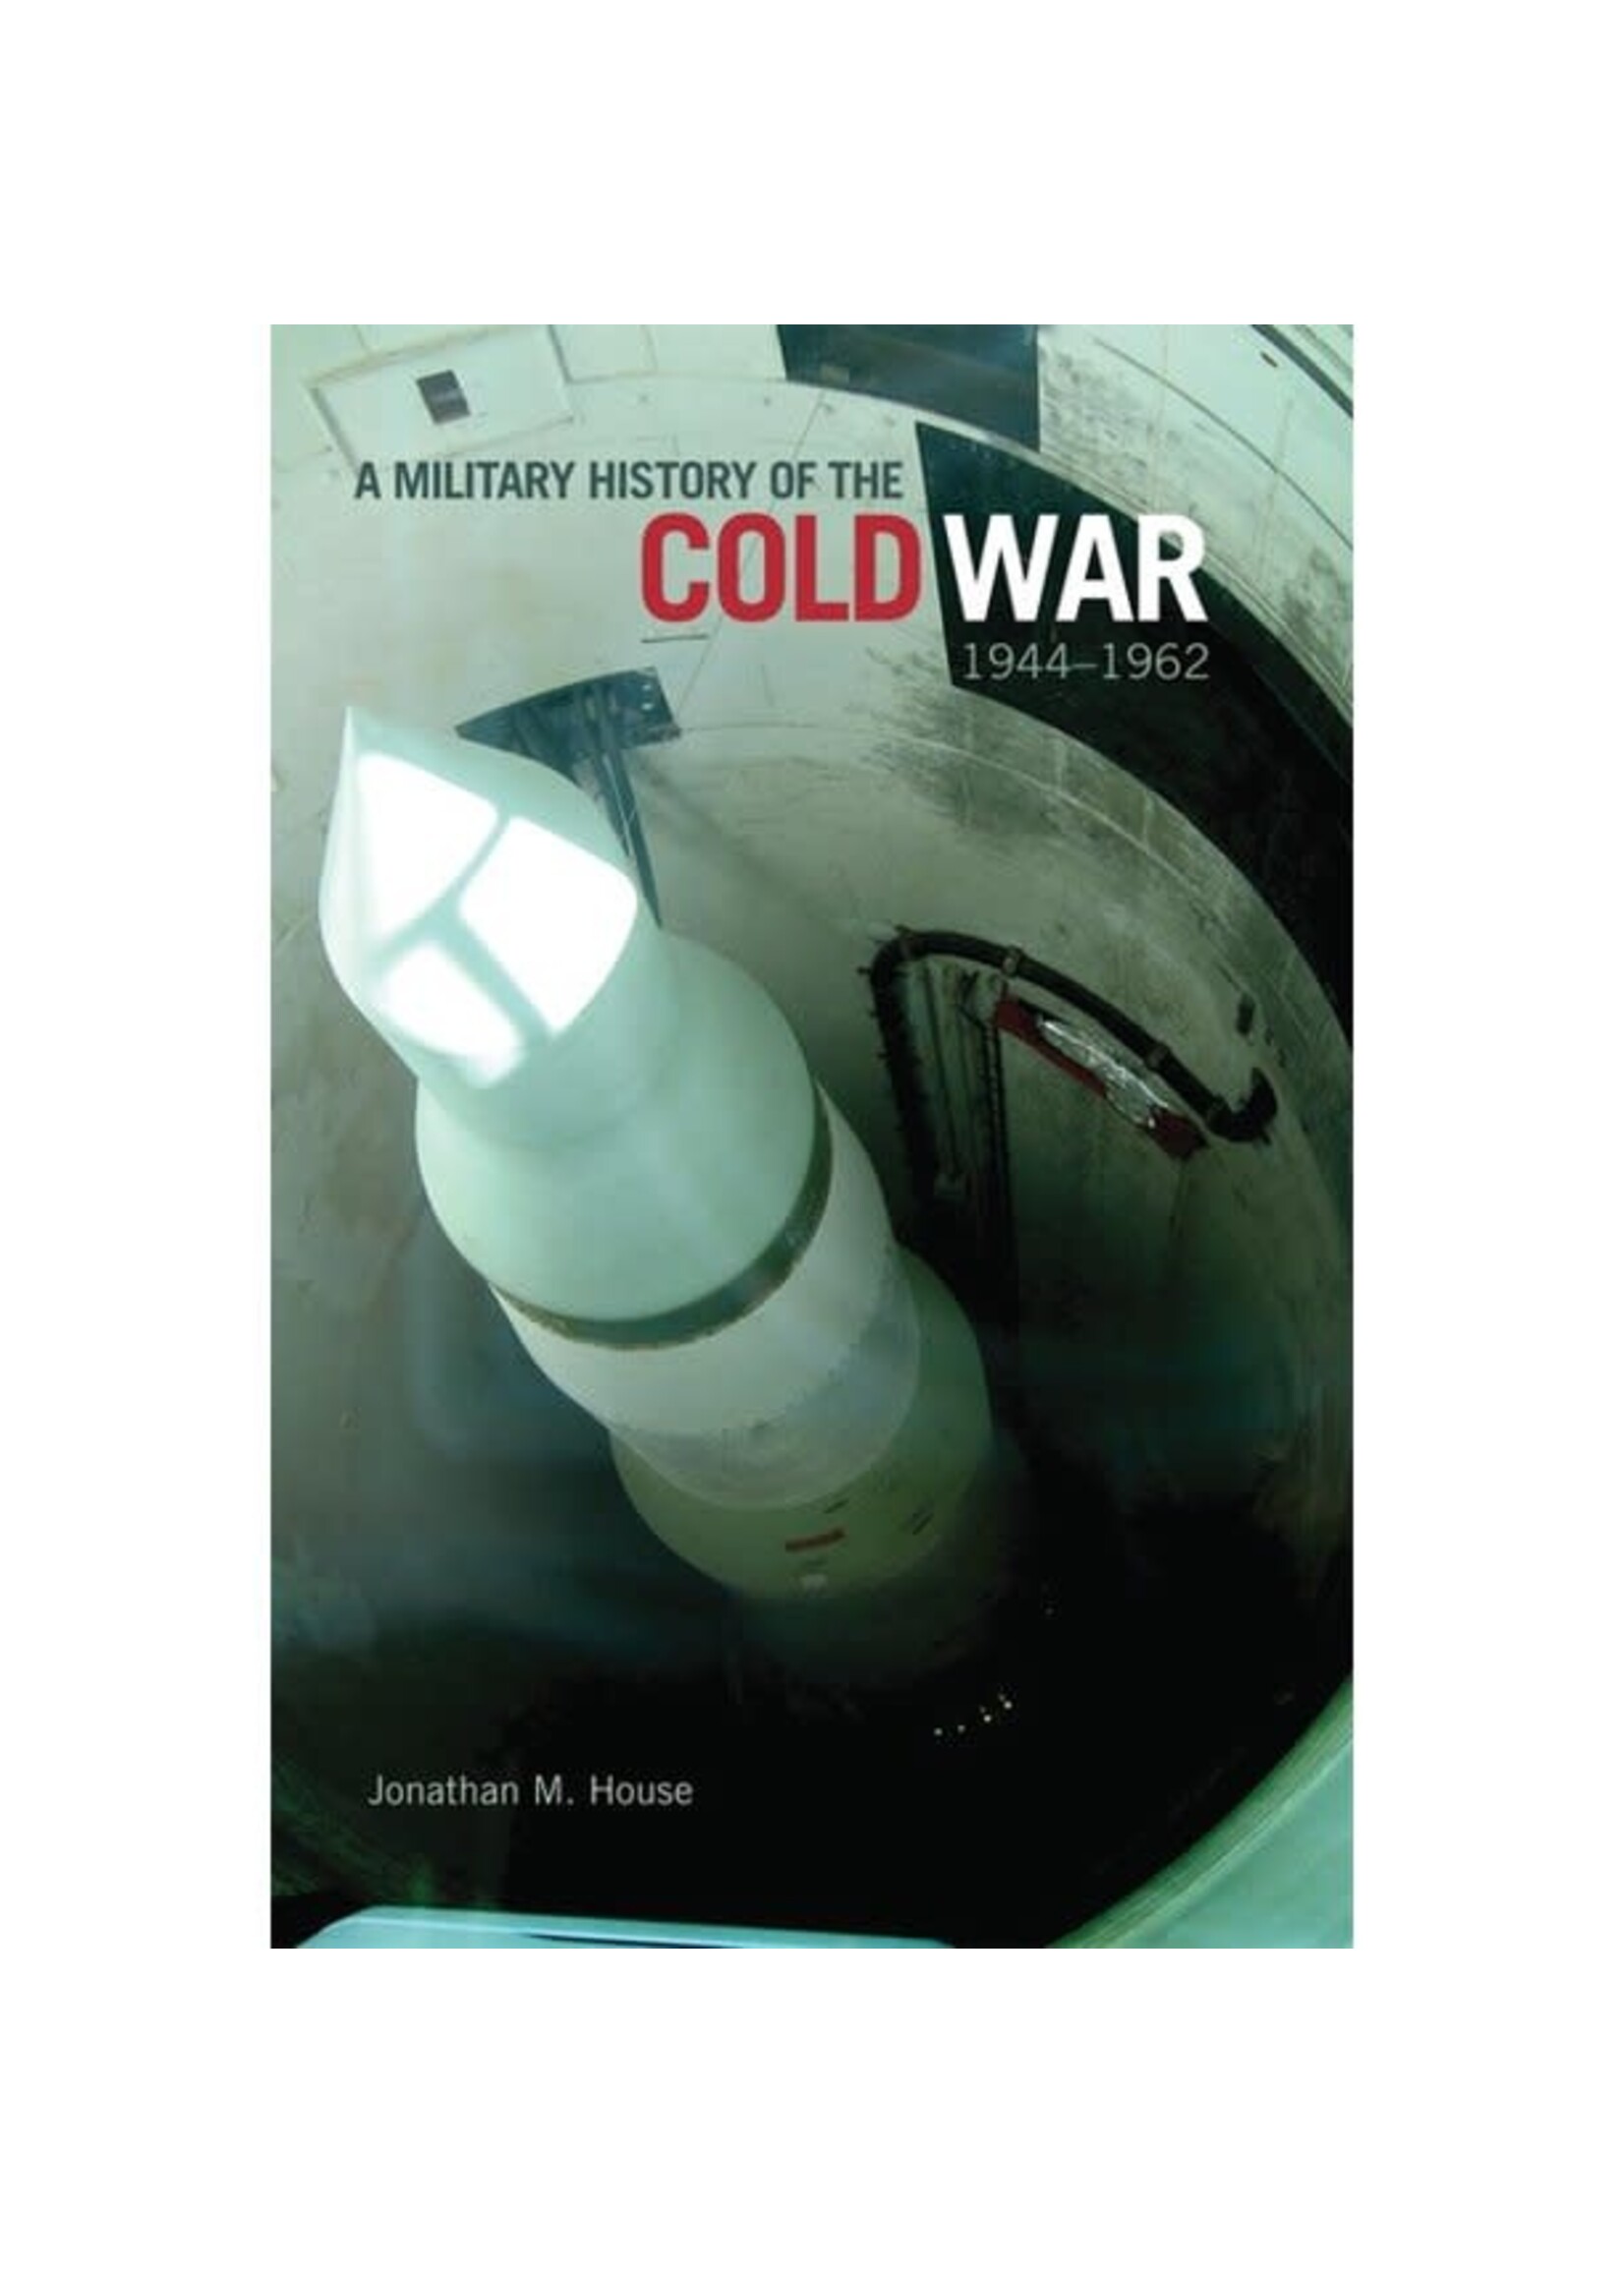 A Military History of the Cold War, 1944 to 1962